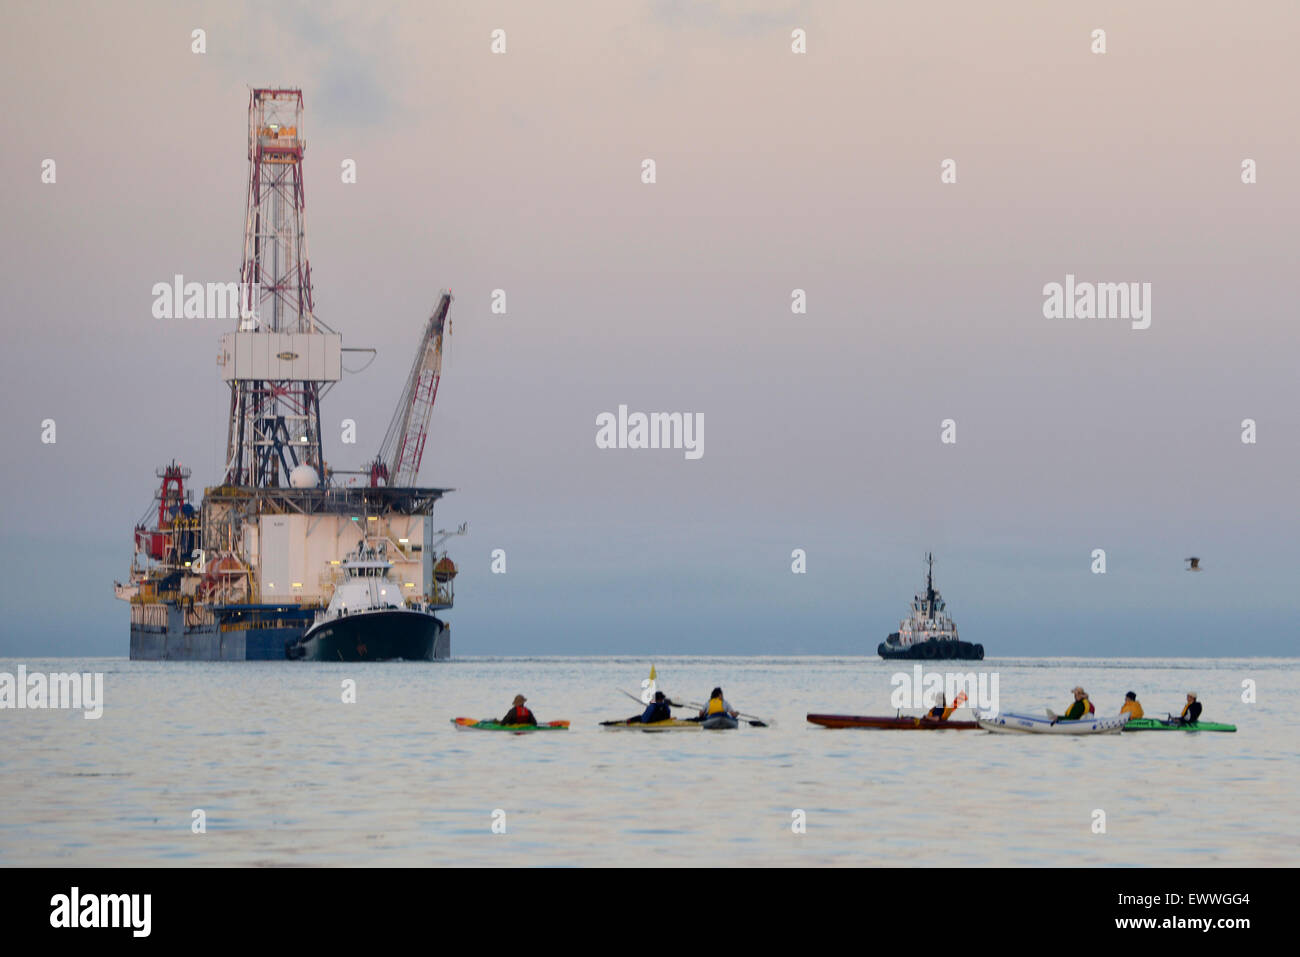 Protesters in kayaks known as kayaktivists attempt to block the deep arctic oil exploration ship Noble Discover as it transits the Puget Sound after departing June 30, 2015 from the Port of Everett, Washington. The Coast Guard enforced a 500-yard safety zone around the vessel as activists continued to try and block the ship. Stock Photo